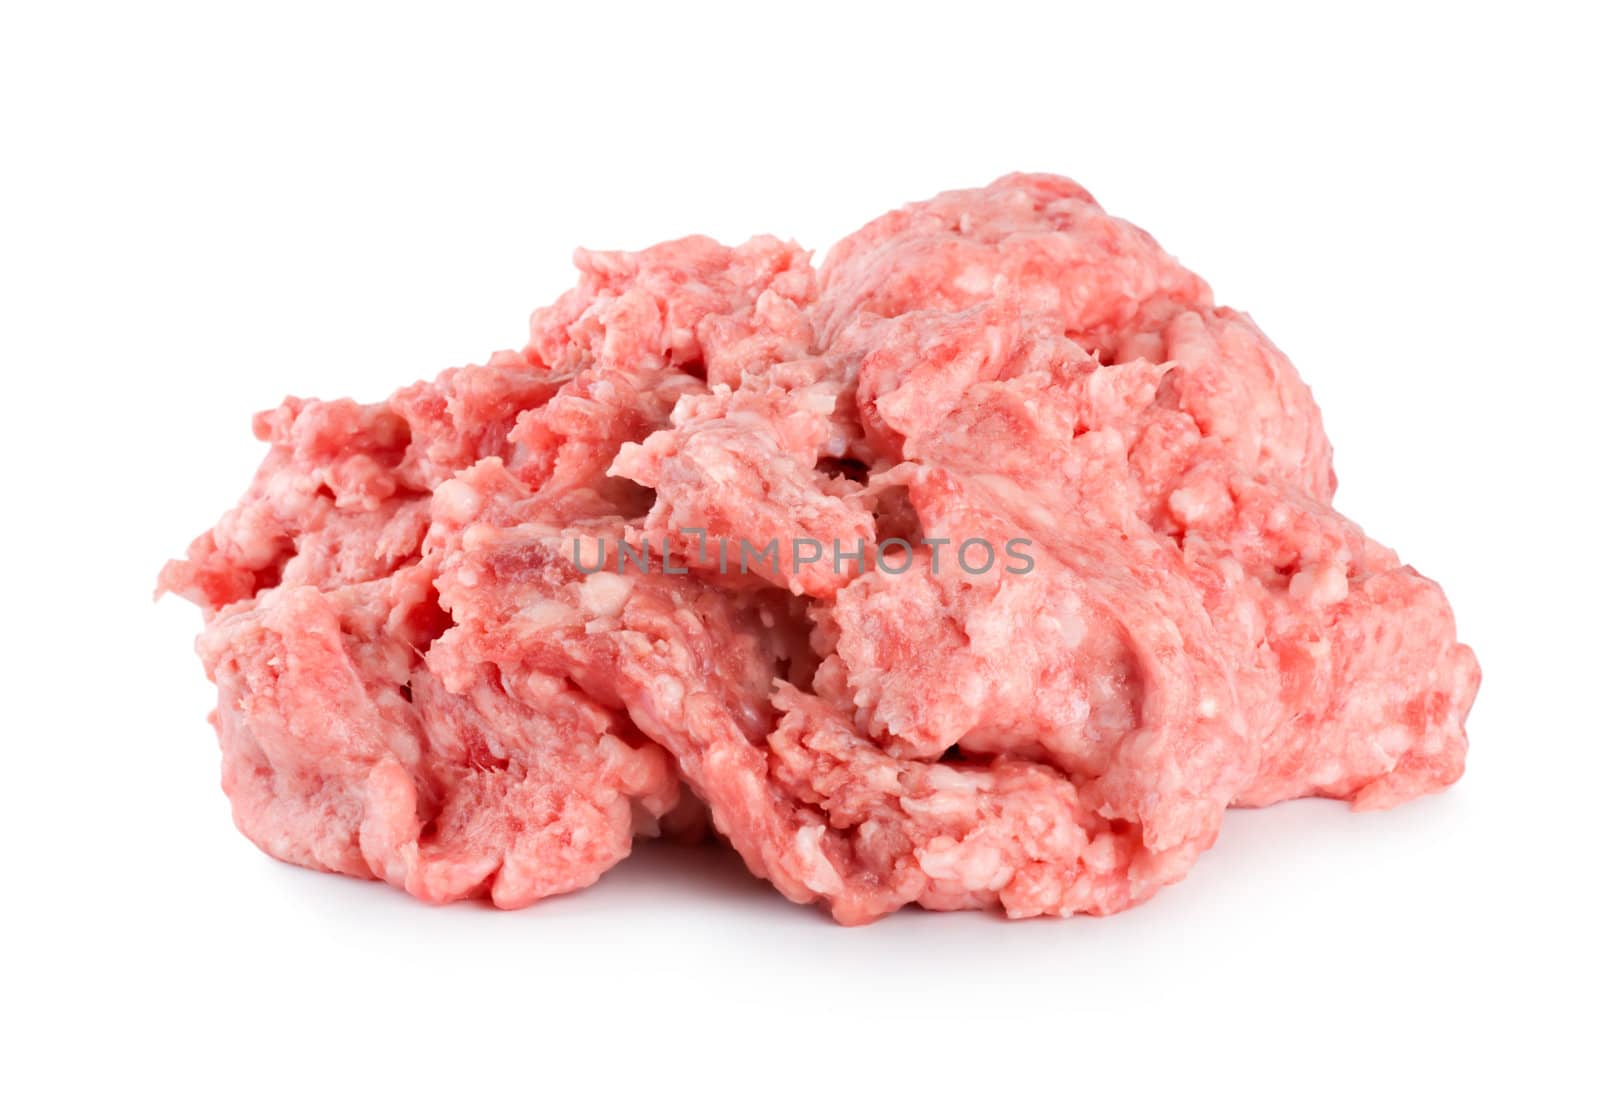 Raw minced meat isolated on a white background